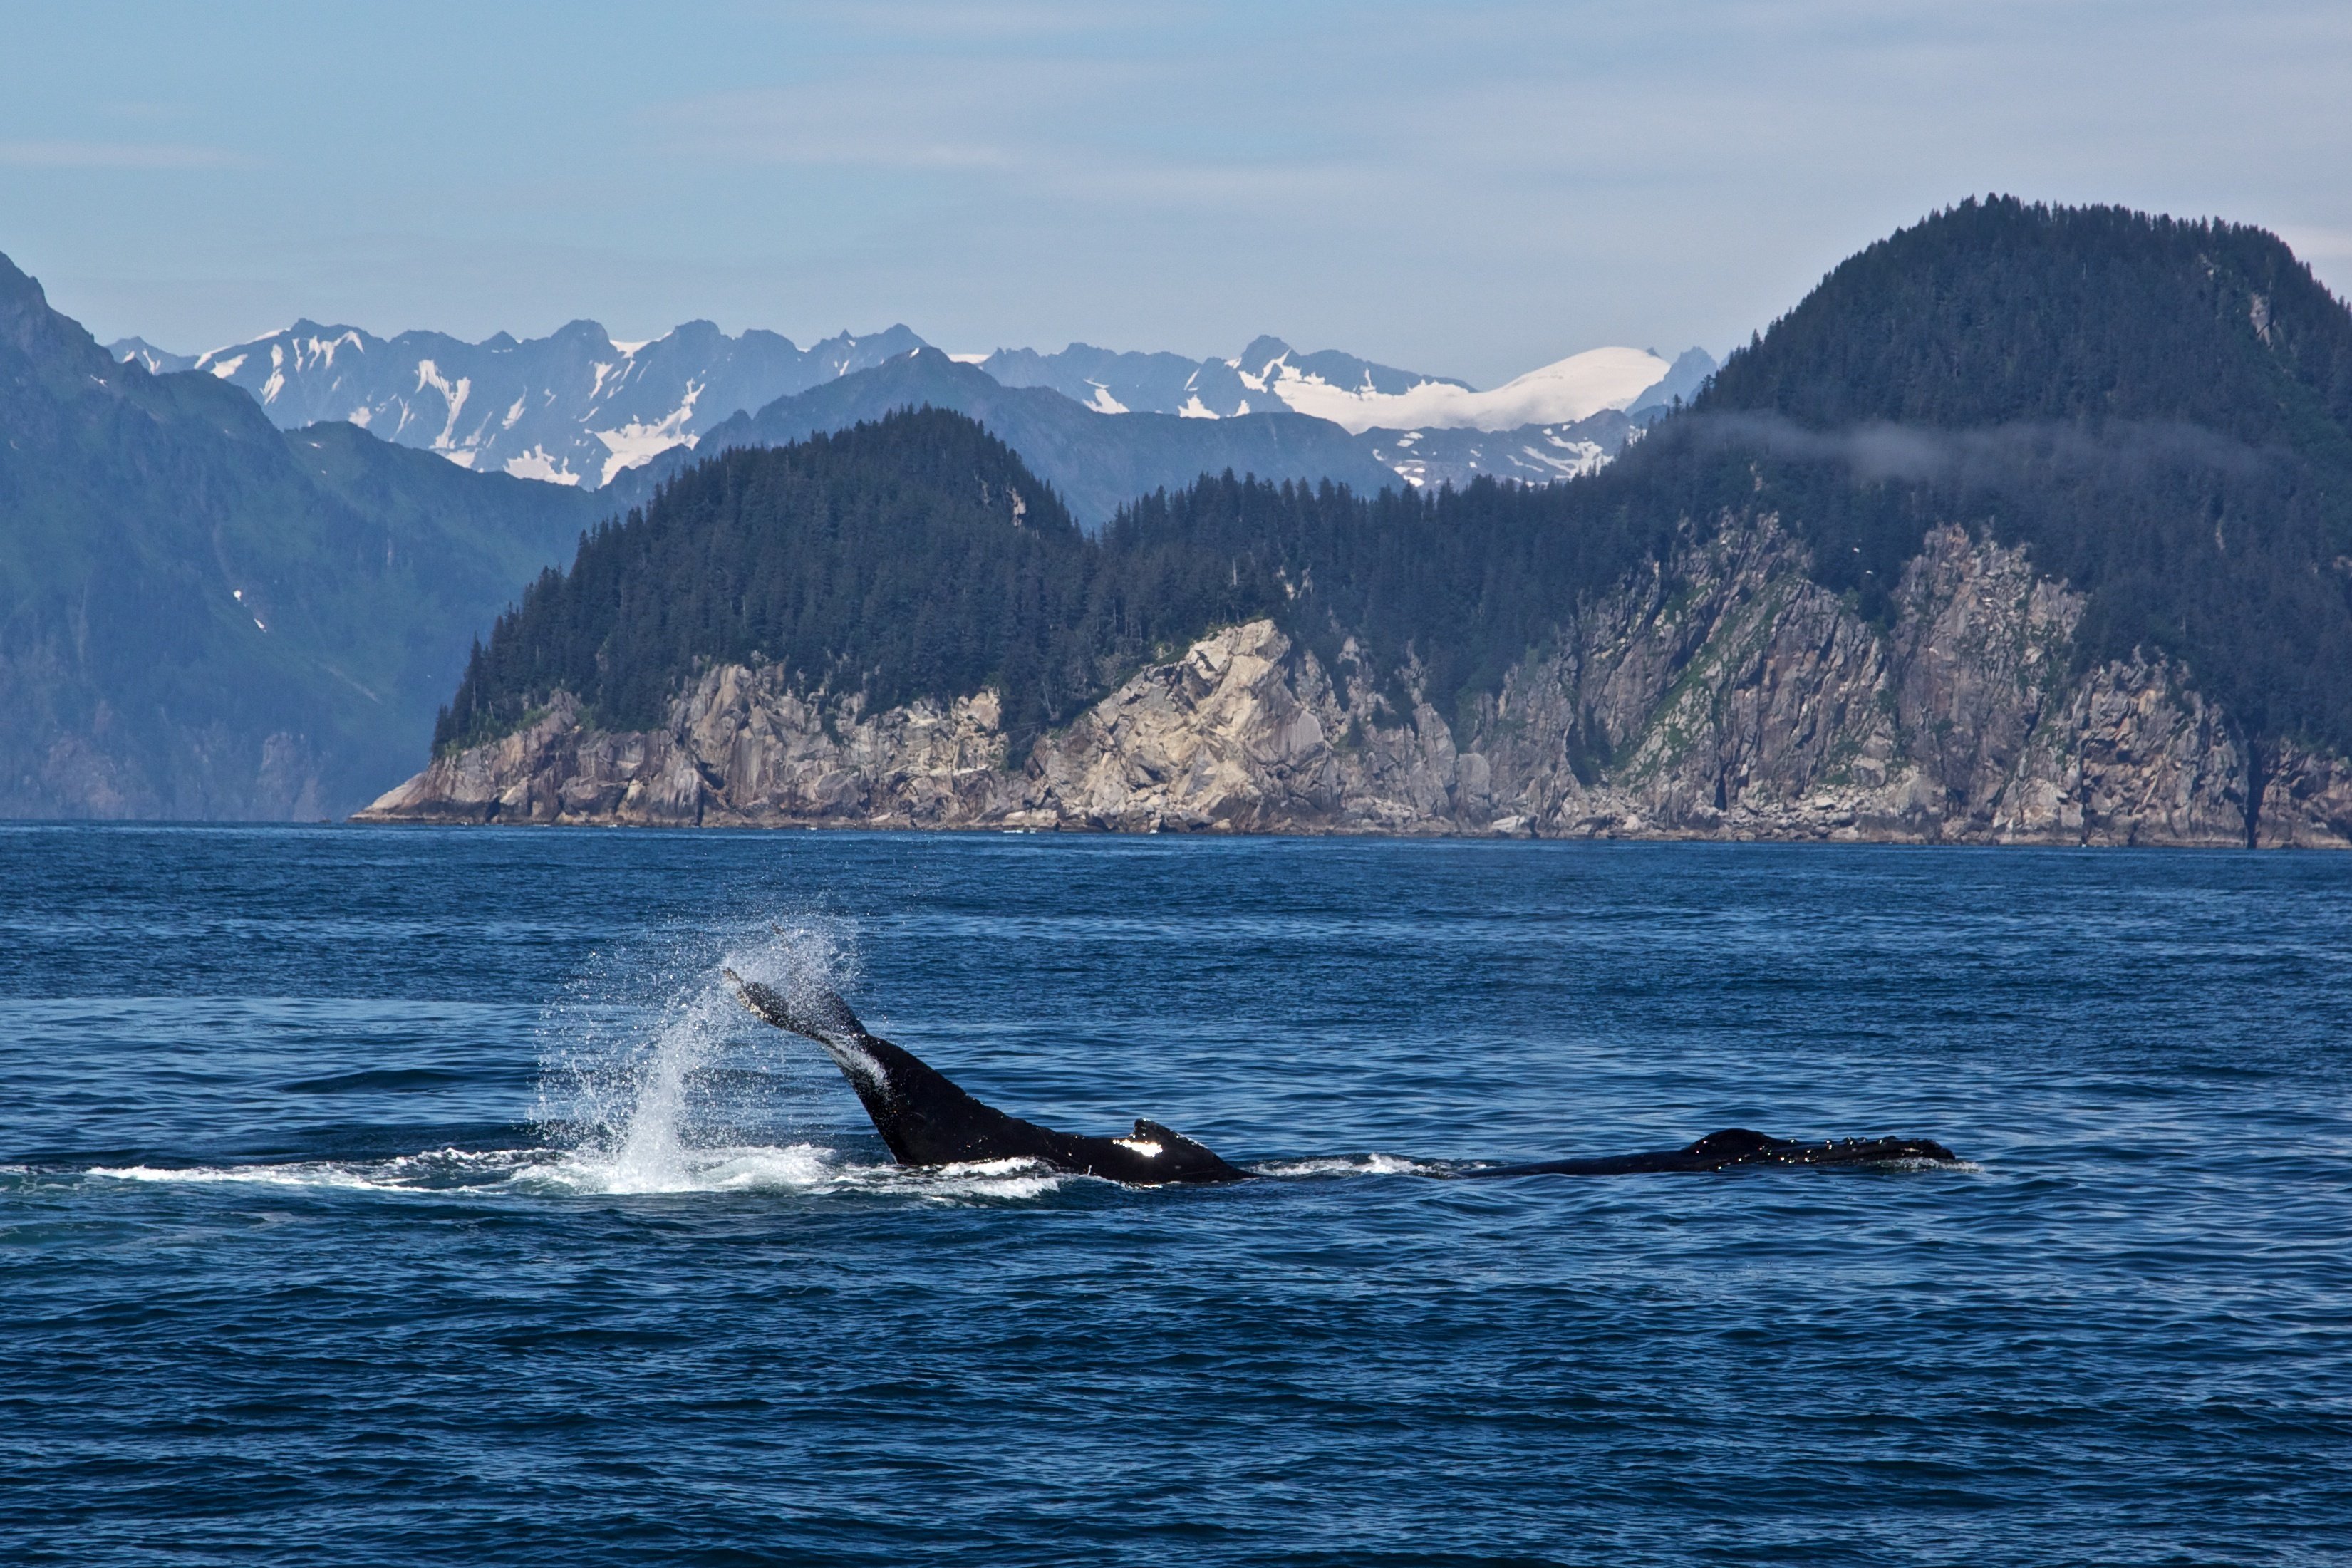 Whale spotted in Kenai Fjords National Park